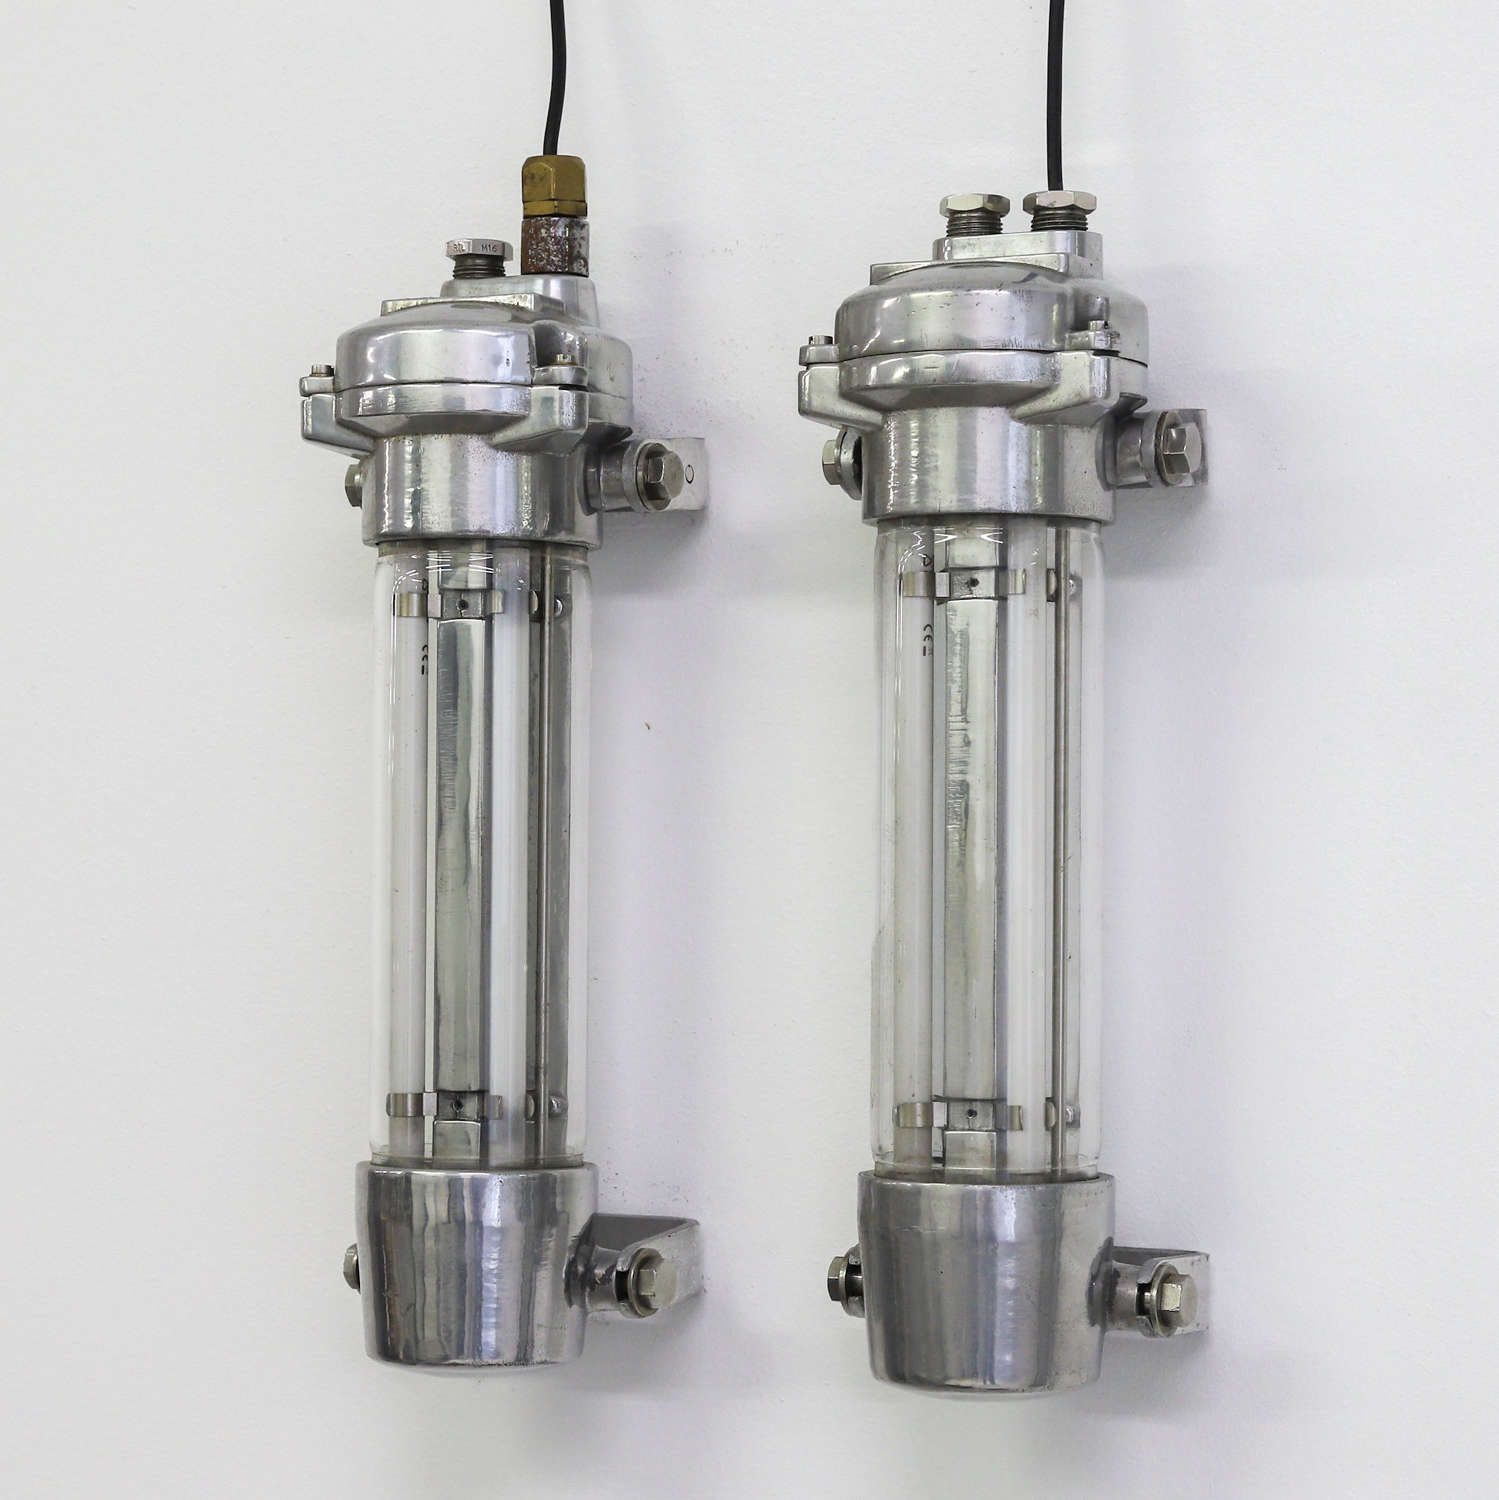 Pair of Lamps from HMS Ark Royal - Restored, Rewired & PAT Tested